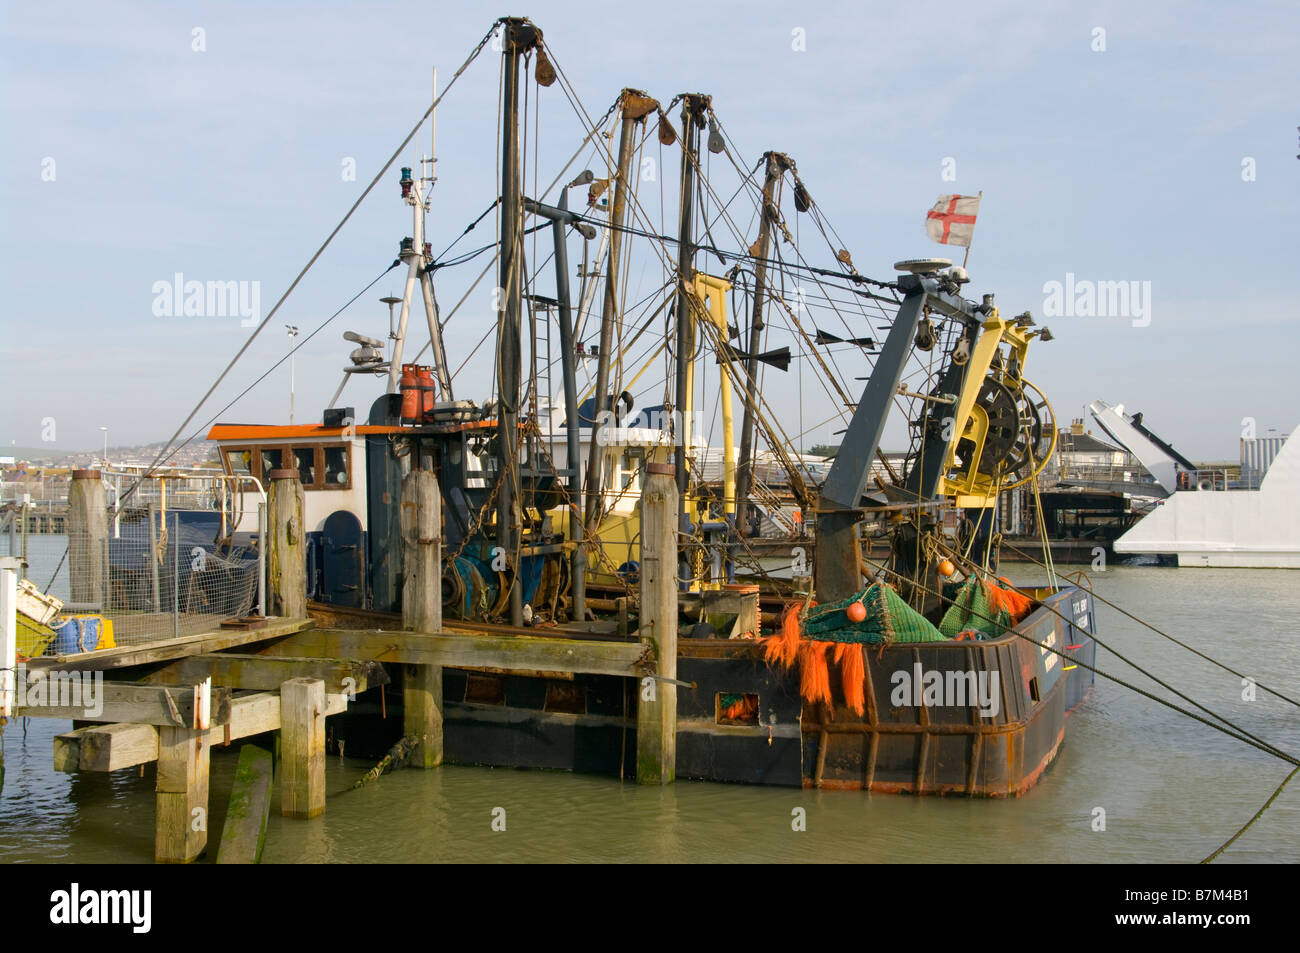 Two Commercial Fishing Boats Trawlers Moored at The West Quay Newhaven East Sussex Fleet UK Stock Photo